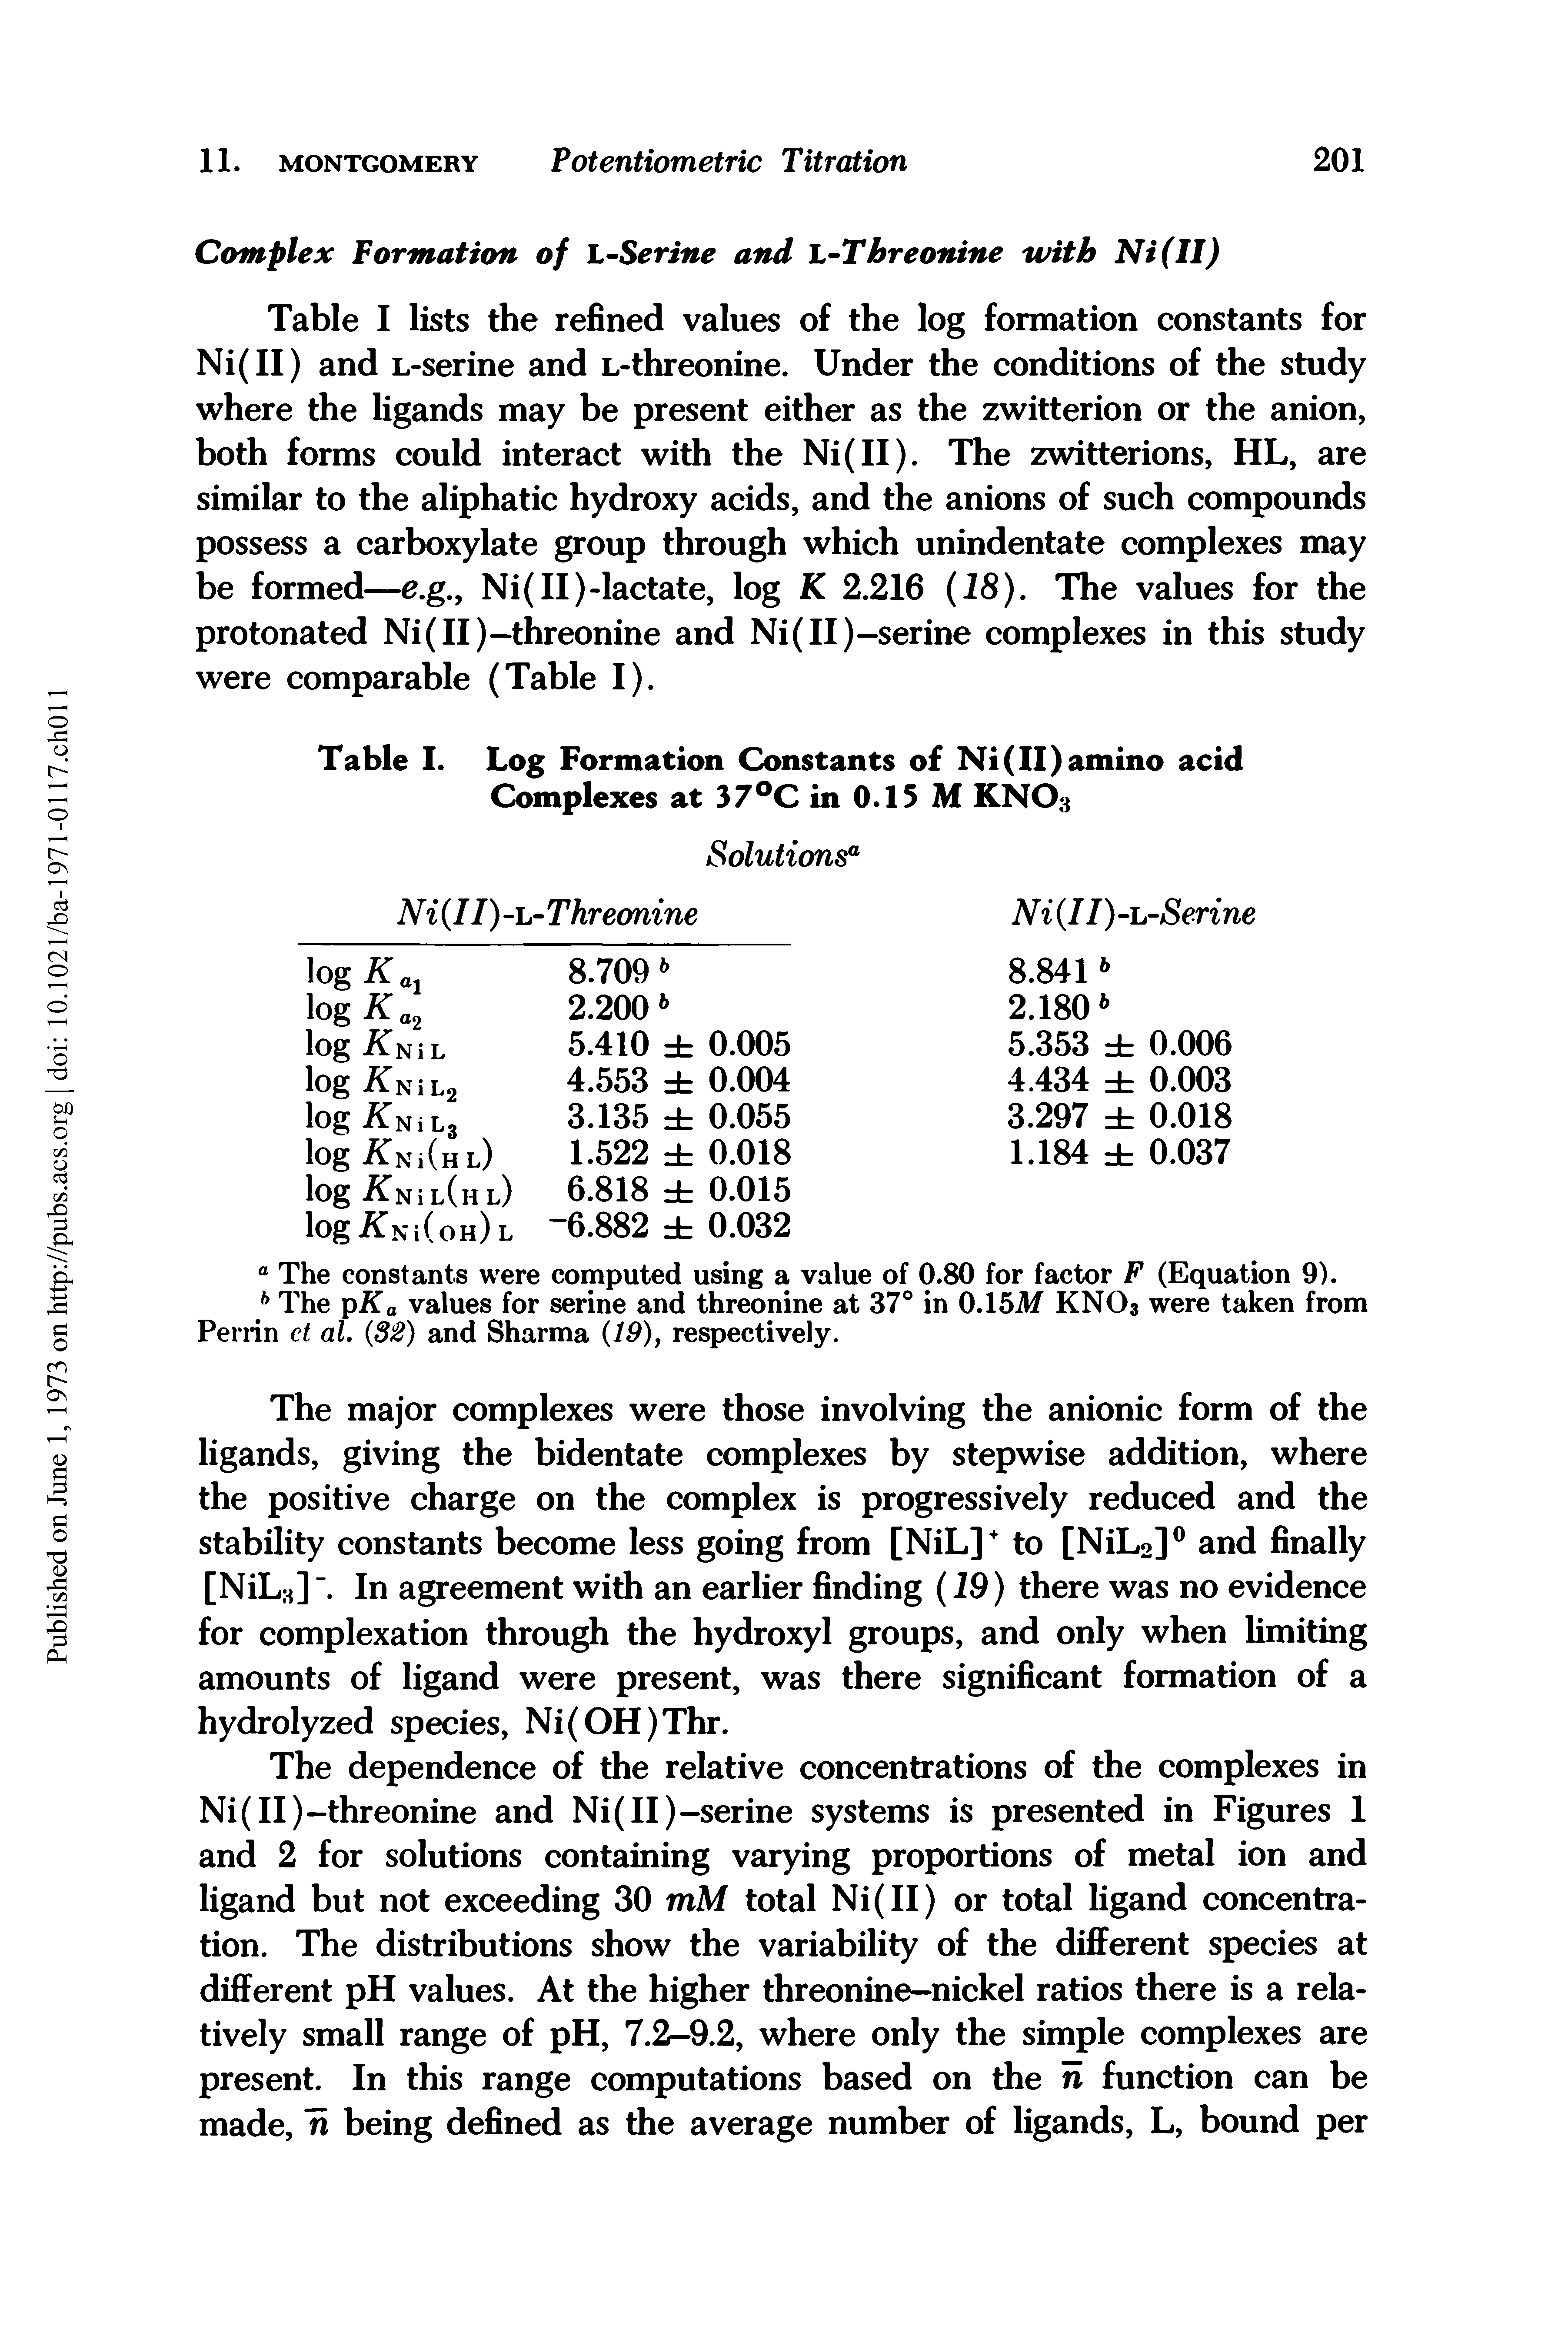 Table I lists the refined values of the log formation constants for Ni(II) and L-serine and L-threonine. Under the conditions of the study where the ligands may be present either as the zwitterion or the anion, both forms could interact with the Ni(II). The zwitterions, HL, are similar to the aliphatic hydroxy acids, and the anions of such compounds possess a carboxylate group through which unindentate complexes may be formed—e.g., Ni(II)-lactate, log K 2.216 (18). The values for the protonated Ni(II)-threonine and Ni(II)-serine complexes in this study were comparable (Table I).